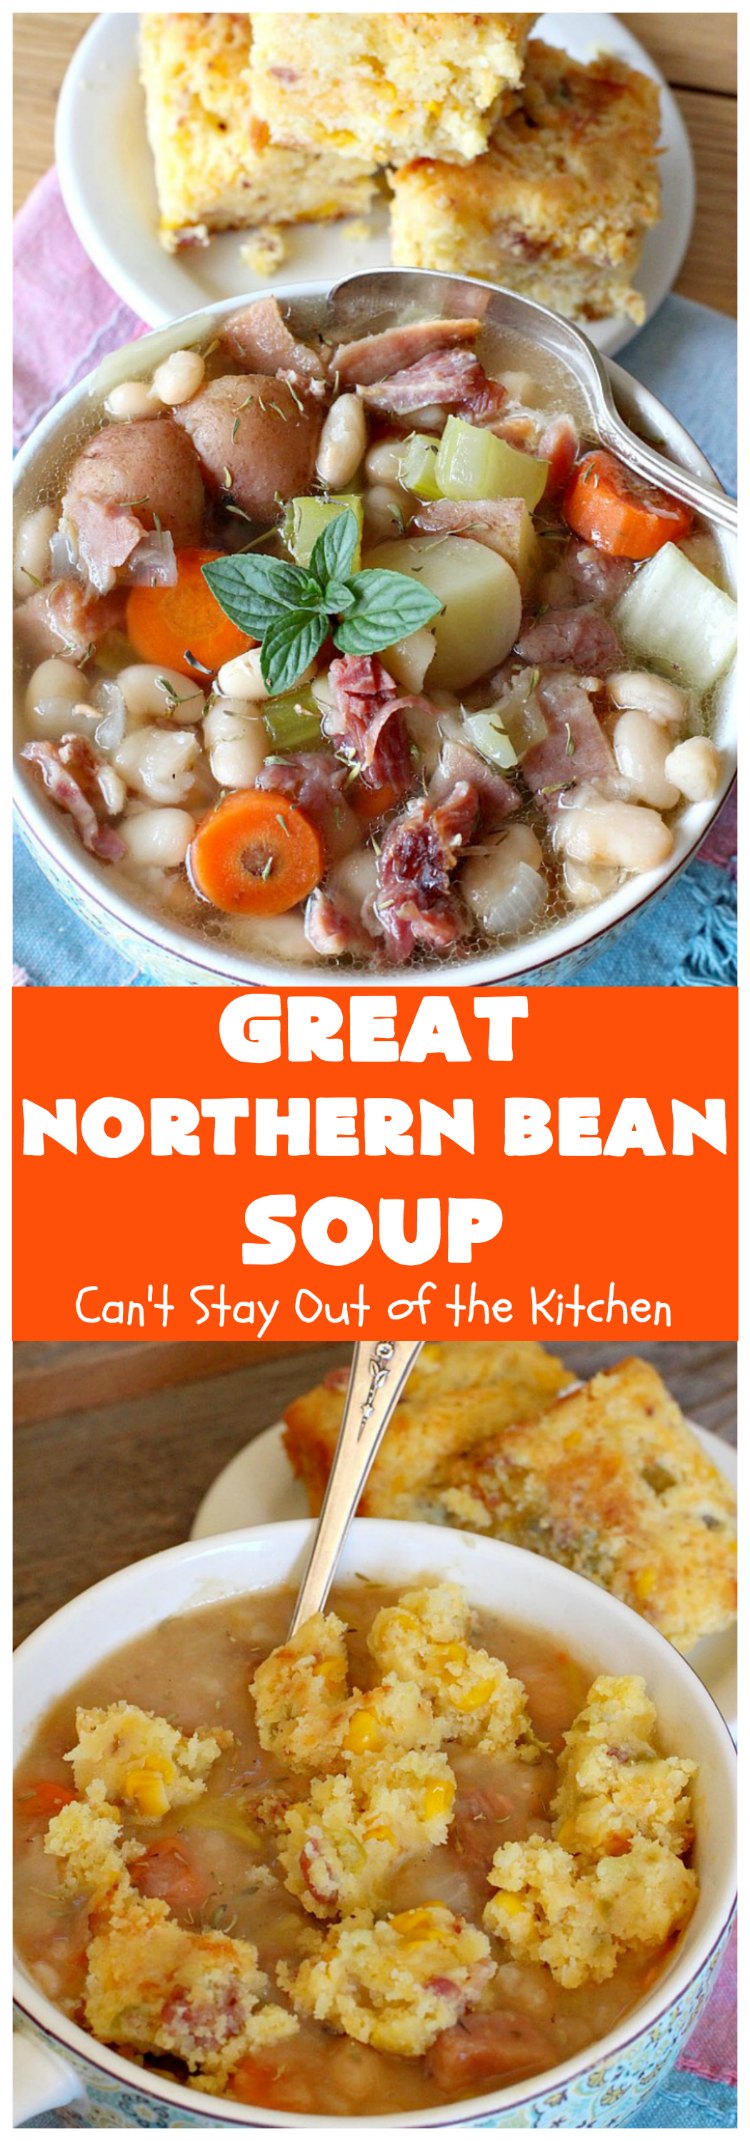 Great Northern Bean Soup | Can't Stay Out of the Kitchen | this is one of the BEST #HamAndBeanSoup #recipes I've ever eaten. This fantastic #GooseberryPatch #soup is hearty, filling, satisfying & irresistible comfort food. It's absolutely awesome served with #cornbread crumbed into it. Our company loved it! Great way to use up leftover #holiday #ham. #pork #GreatNorthernBeans #GreatNorthernBeanSoup #GlutenFree #ham #potatoes #carrots